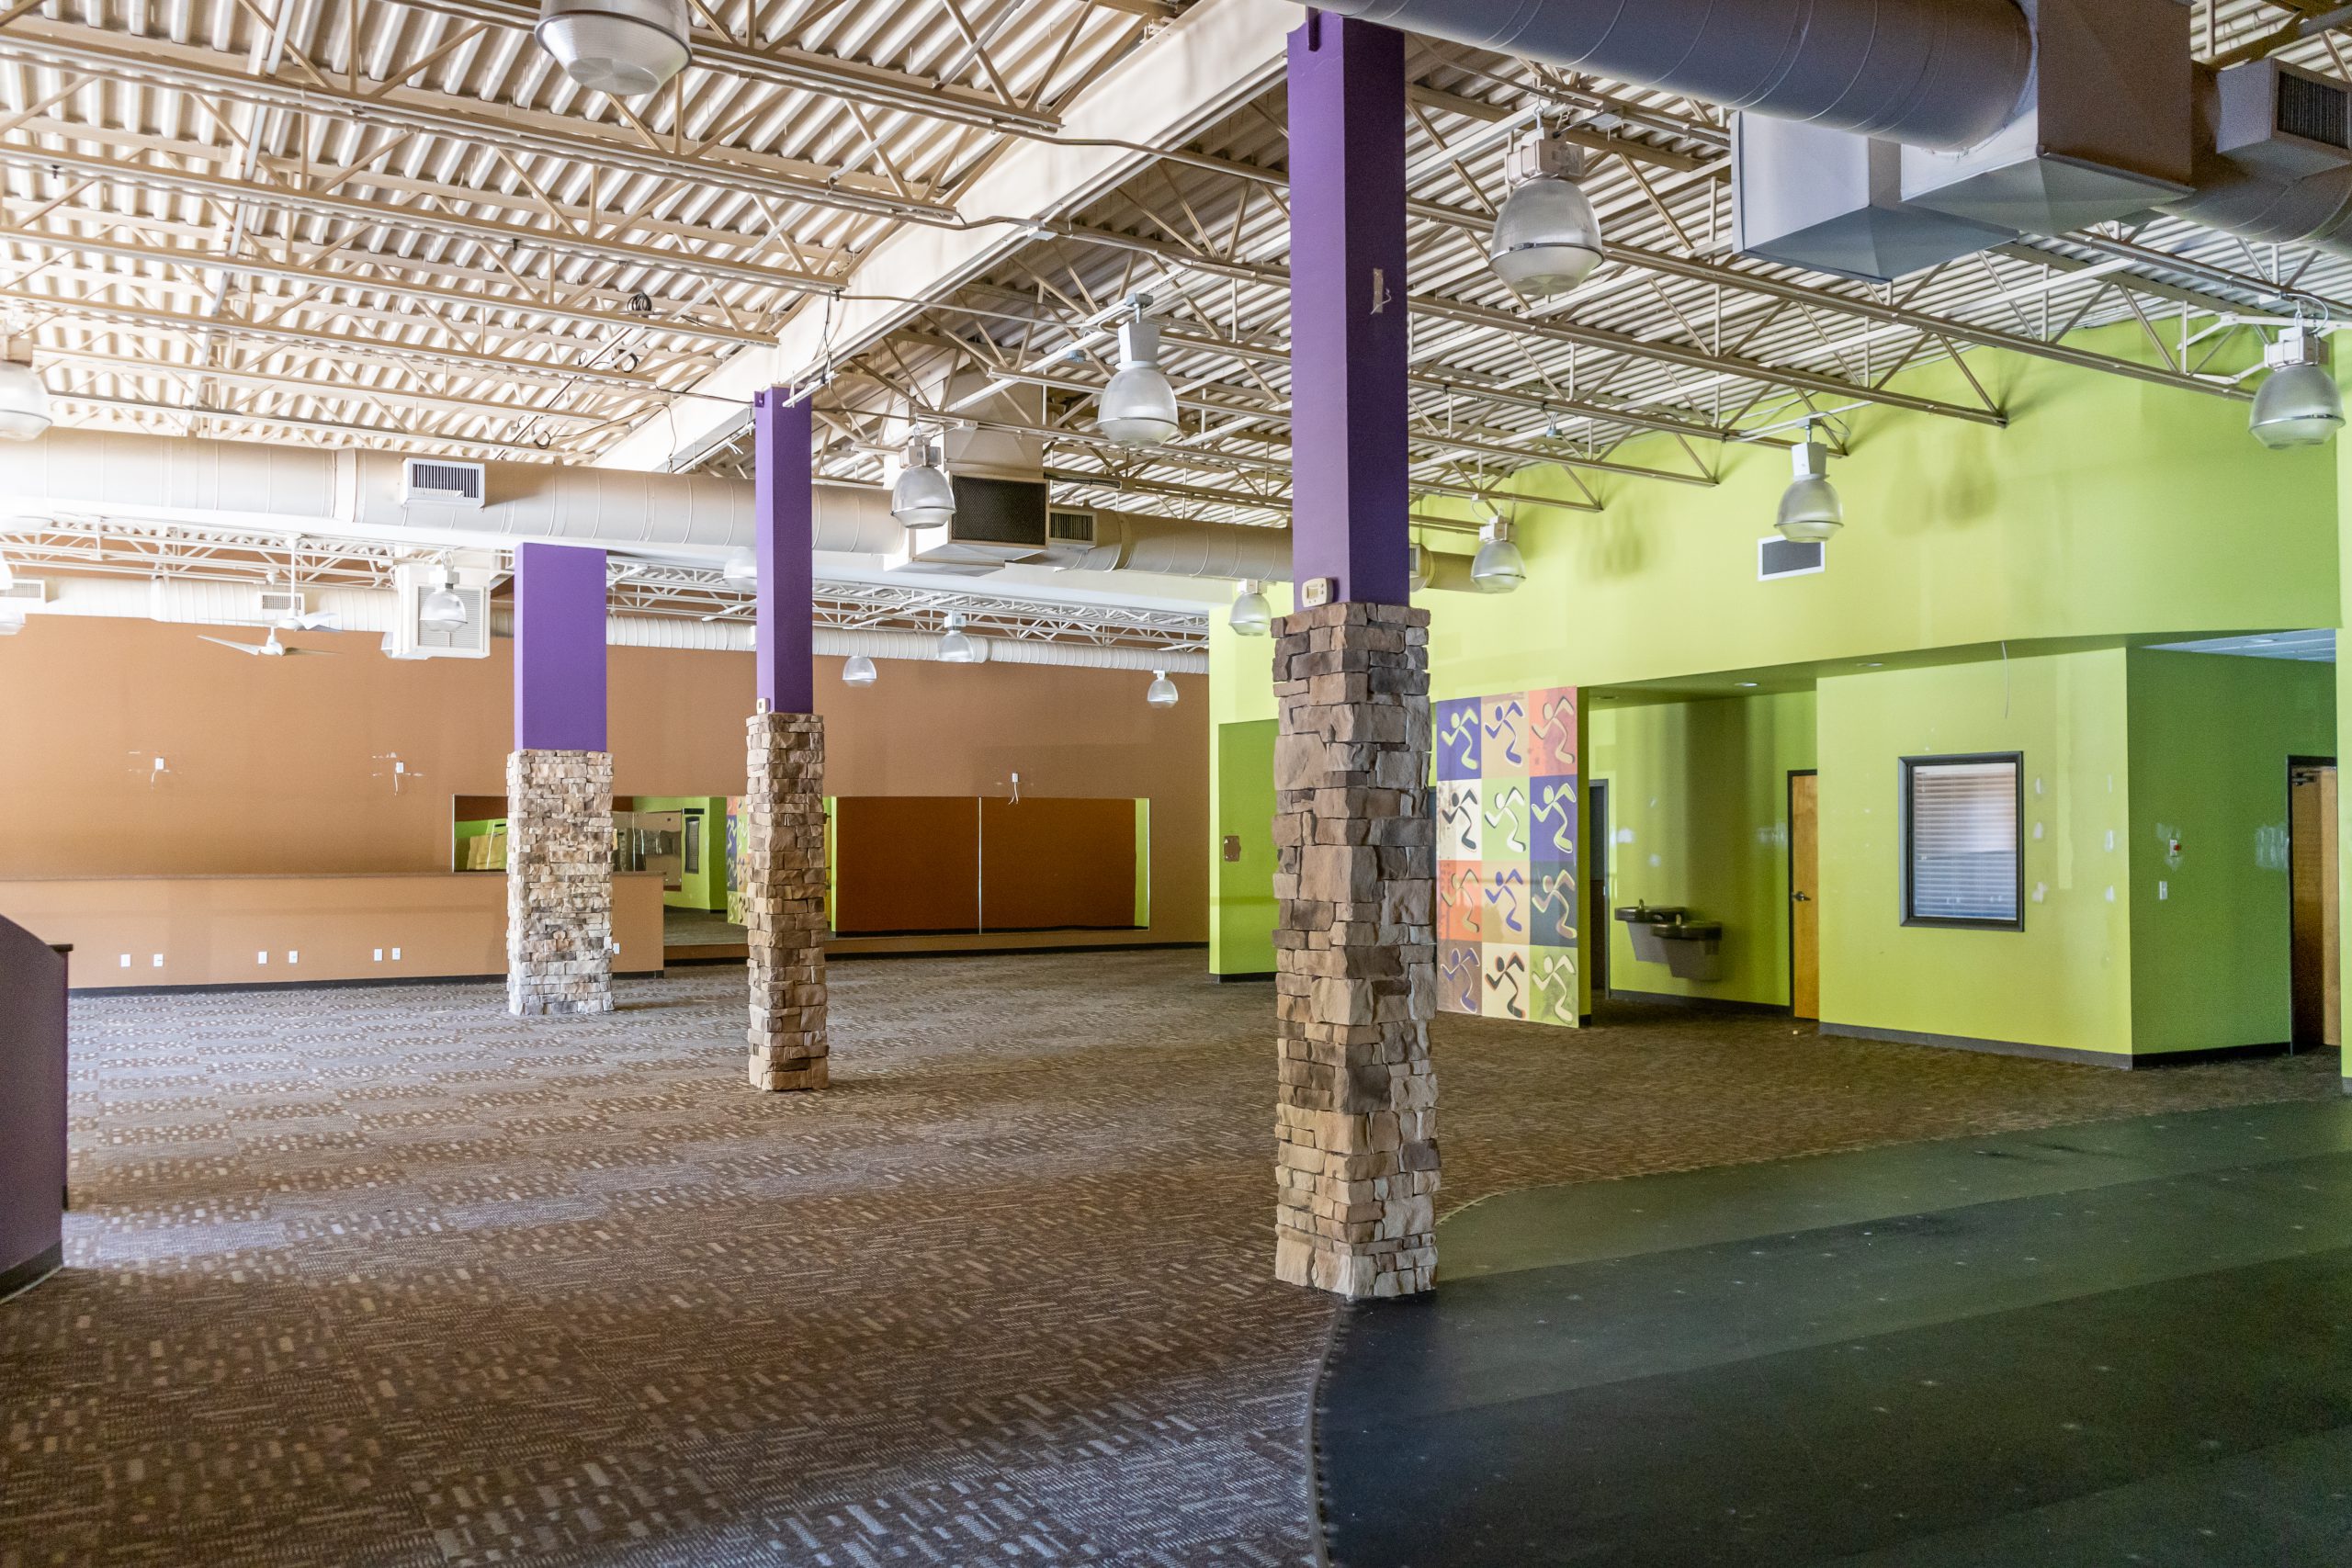 The interior of a fitness center space.